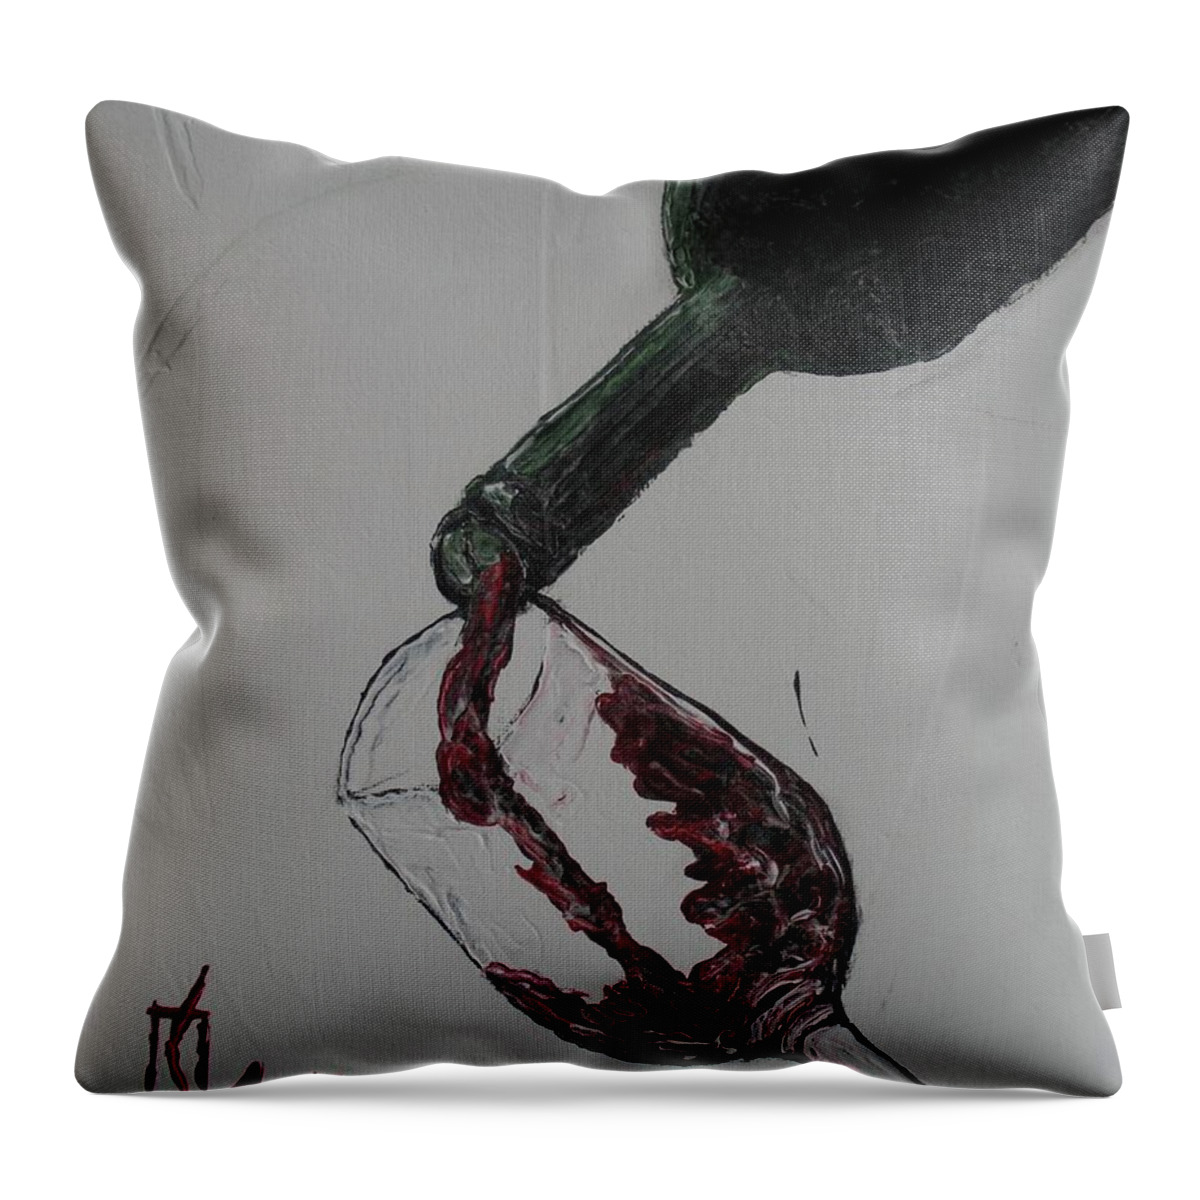 Wine Throw Pillow featuring the painting Pour by Lee Stockwell